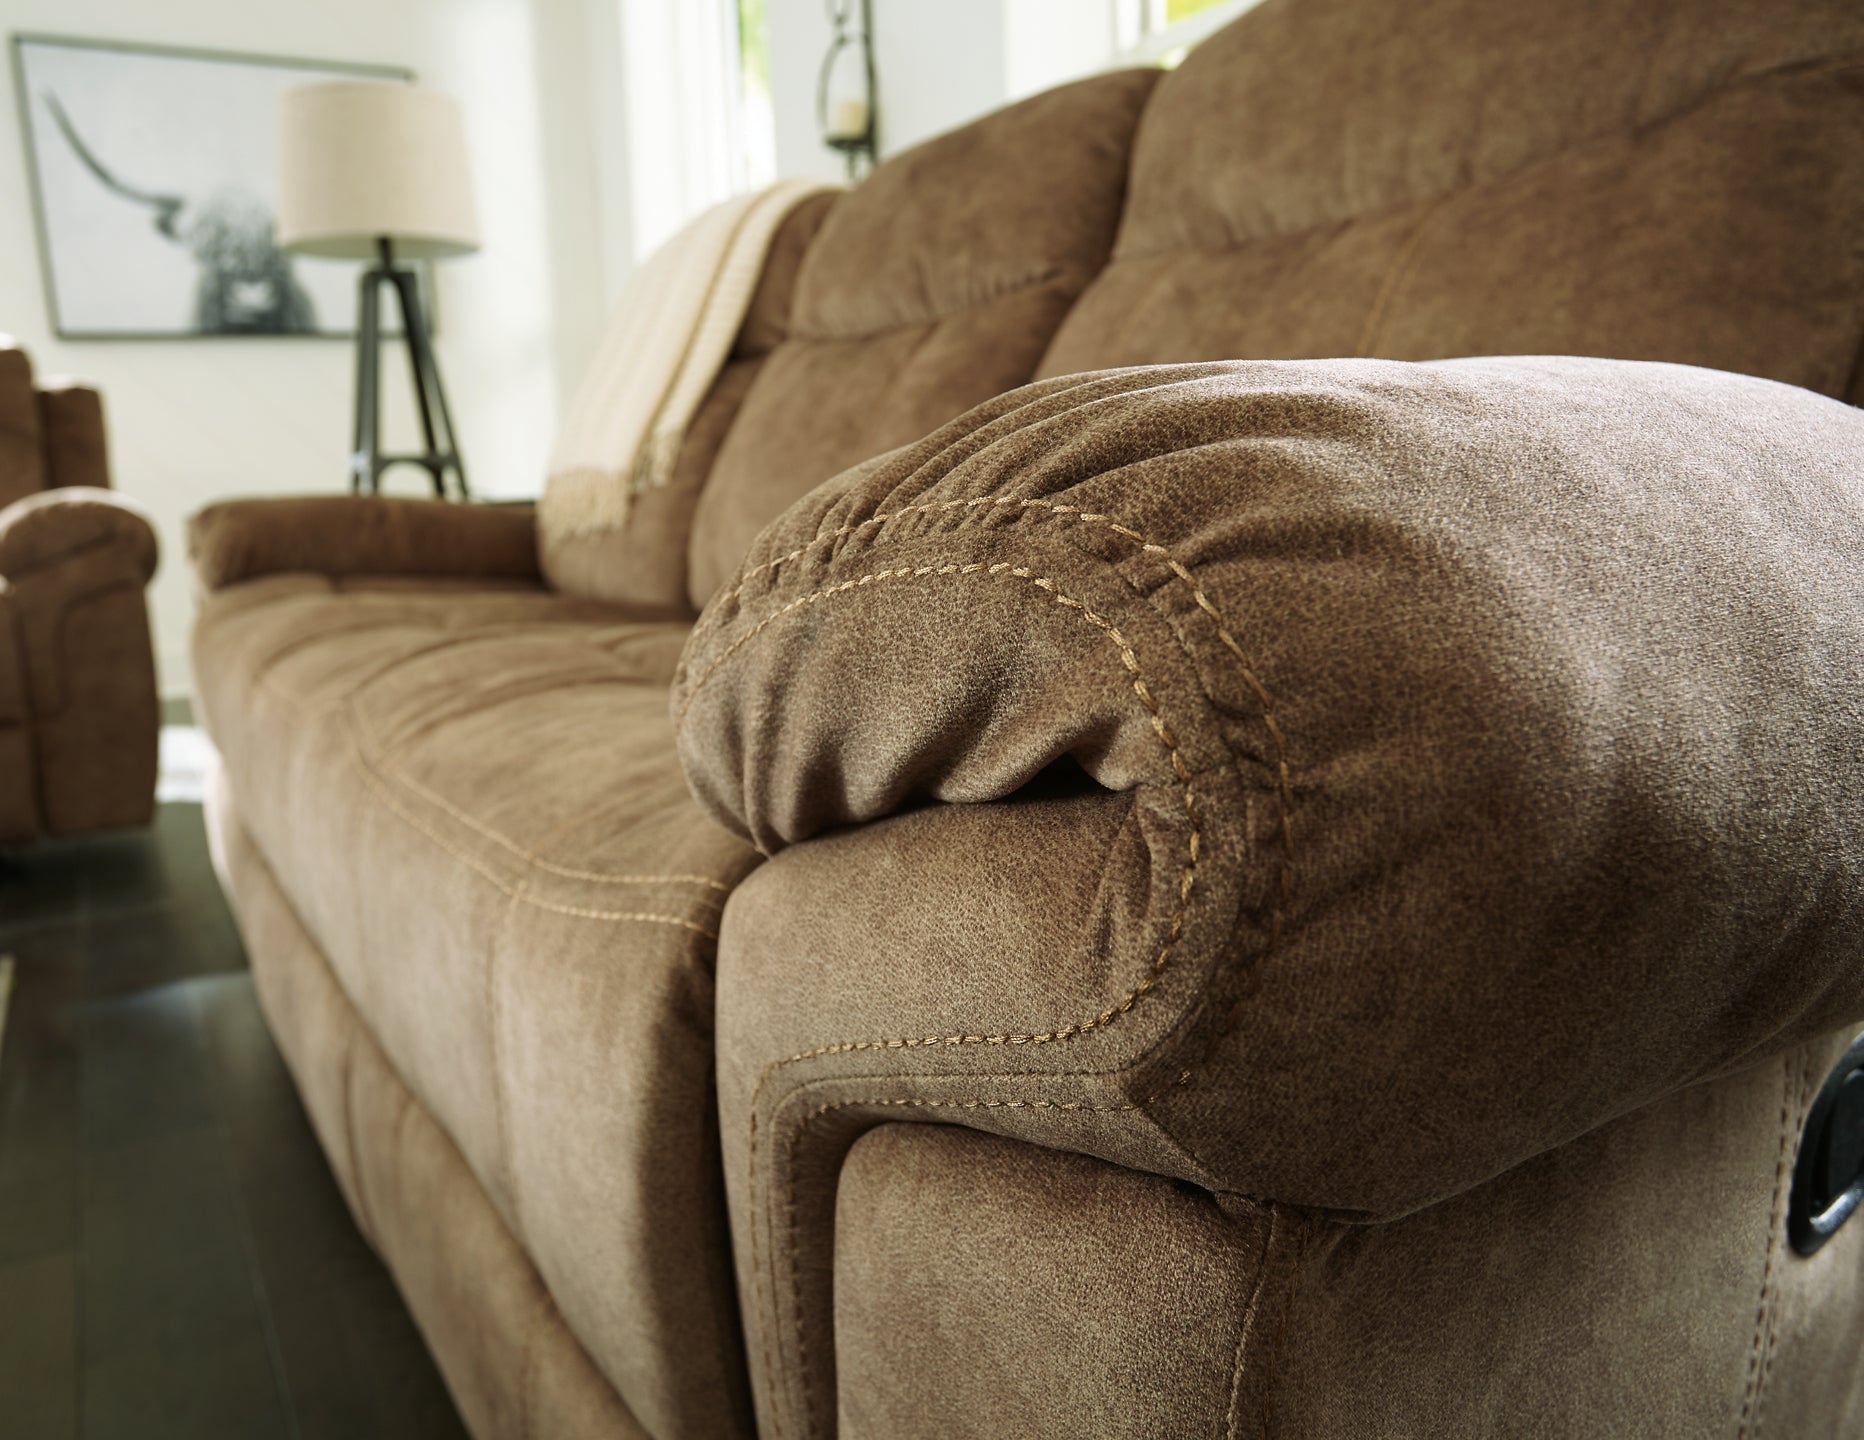 Huddle-Up Sofa, Loveseat and Recliner Rent Wise Rent To Own Jacksonville, Florida